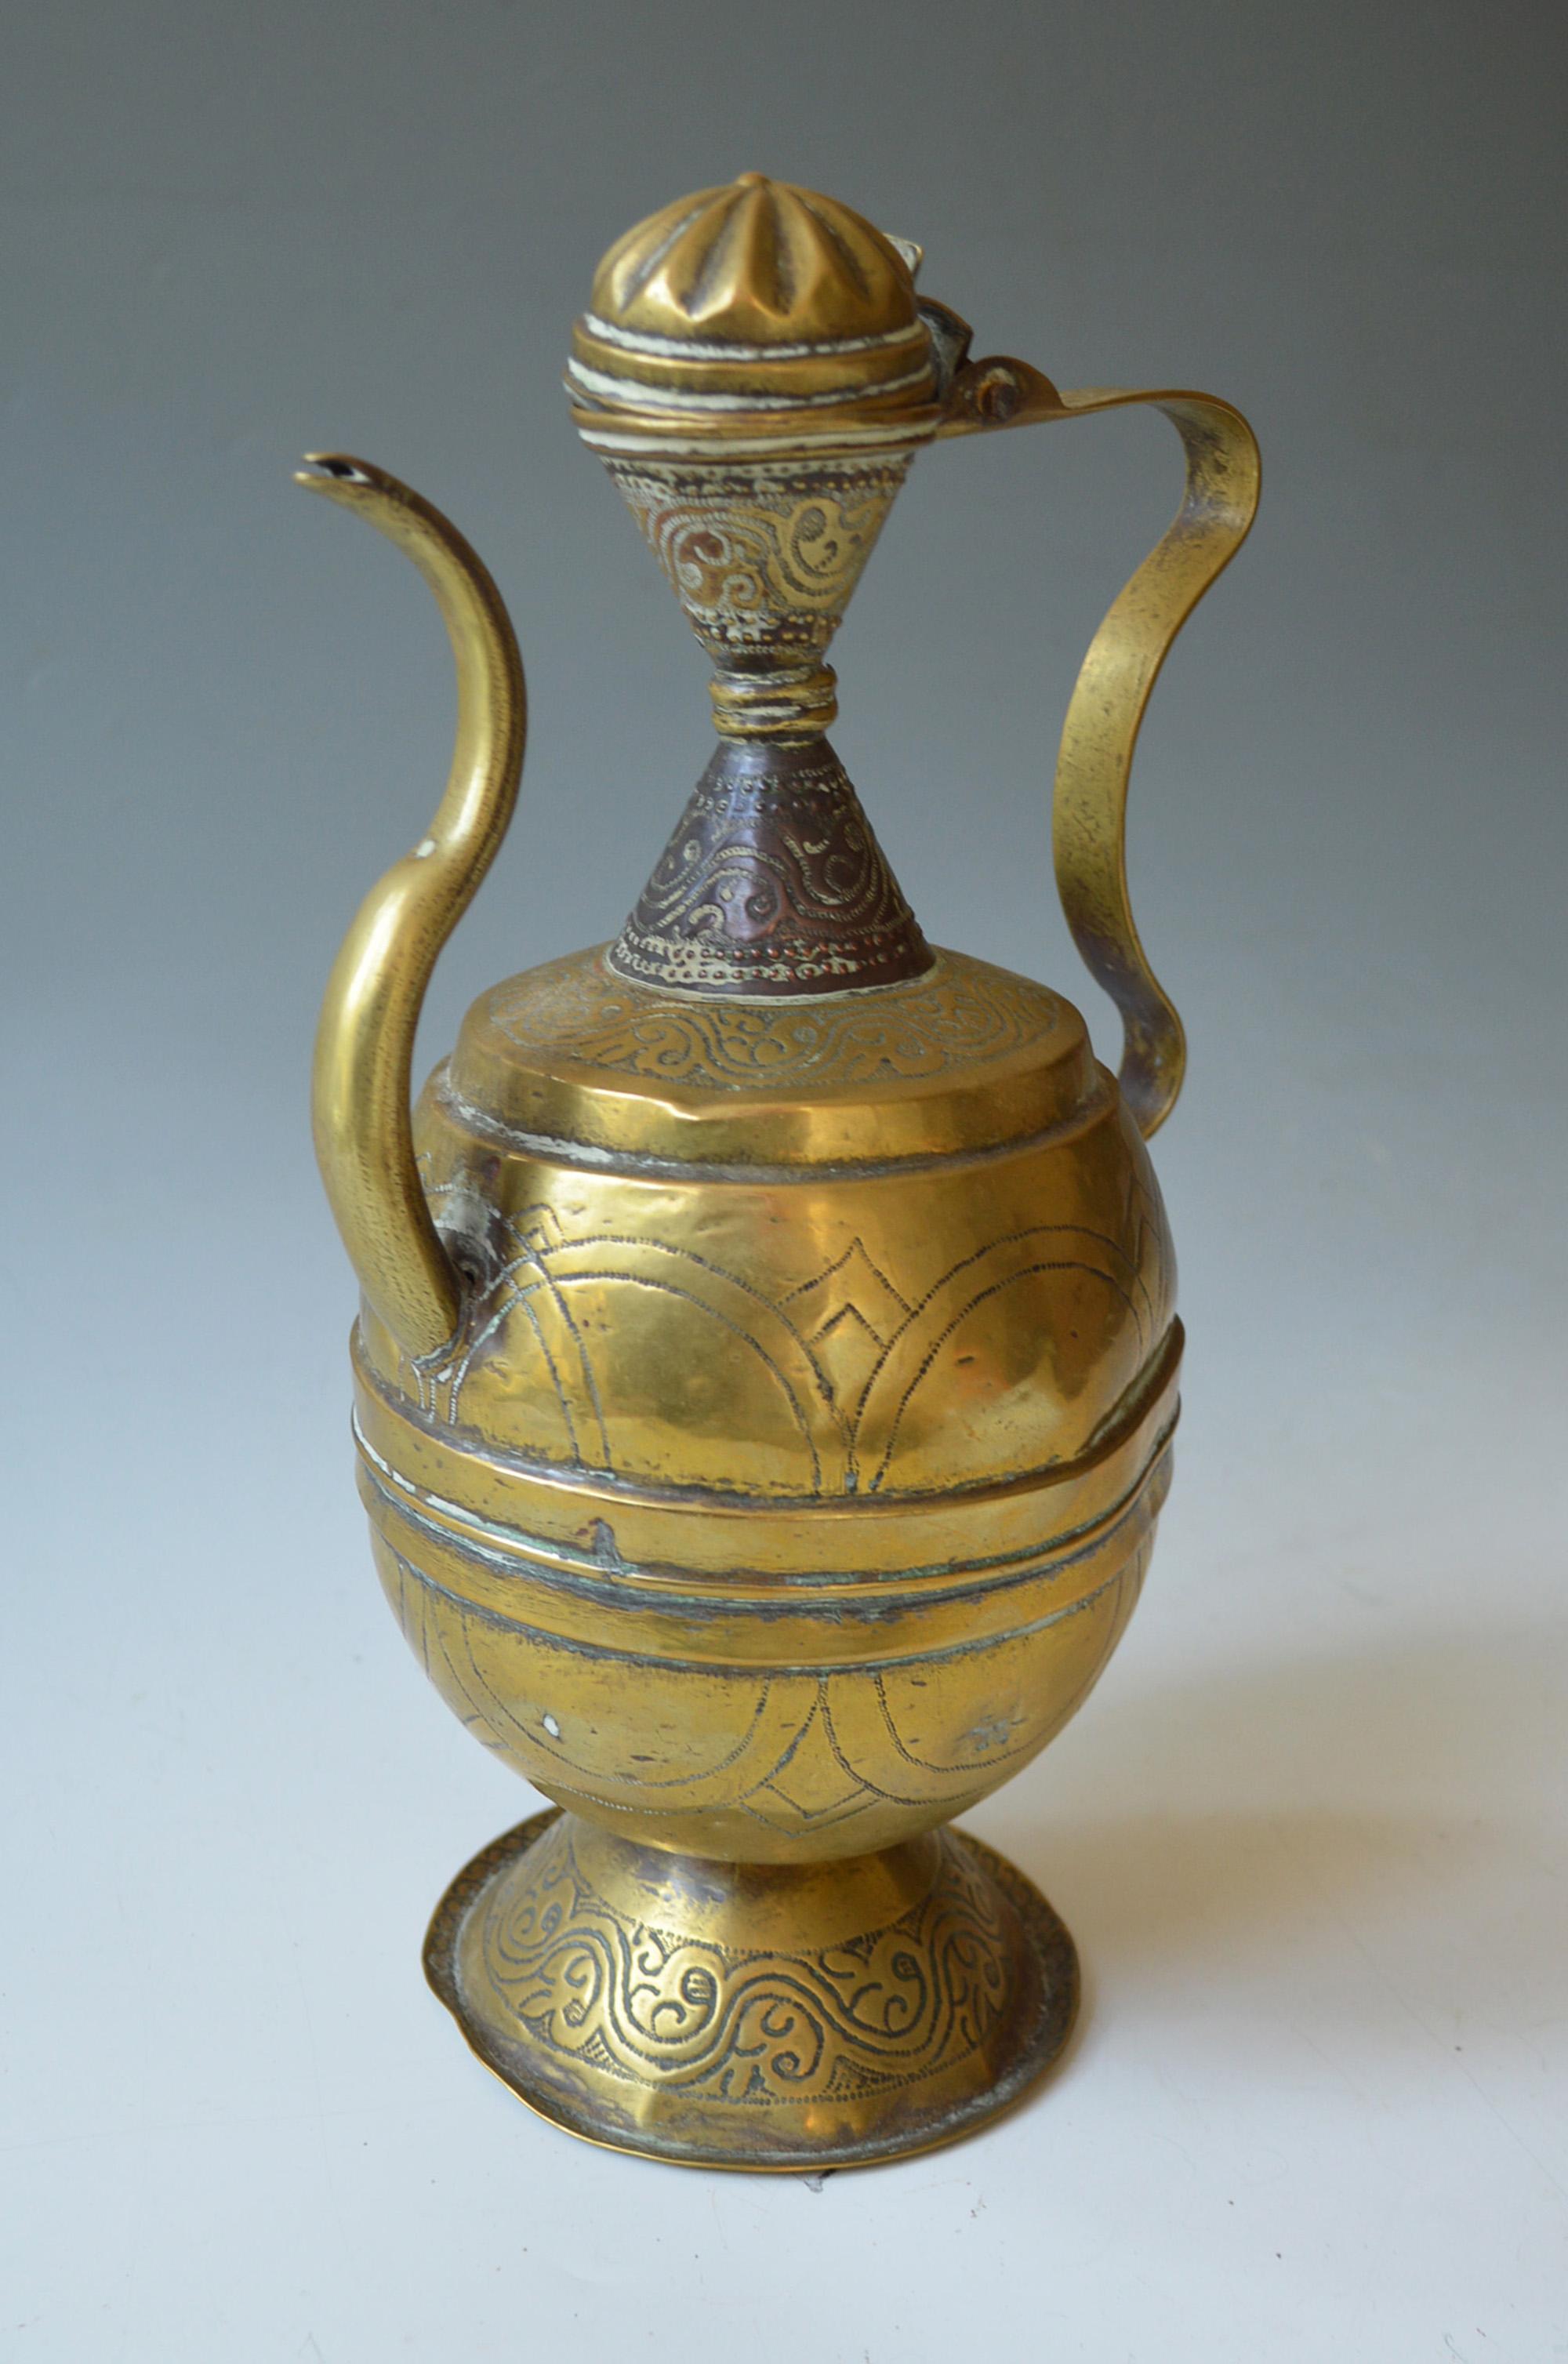 A Elegant brass Ewer from the Nupe people of Nigeria,

Hand raised and worked from beaten sheet brass and copper

The Nupe people are very skilled metal workers and wood carvers and renowned for art

Period 19 th century

Measures: Height 34